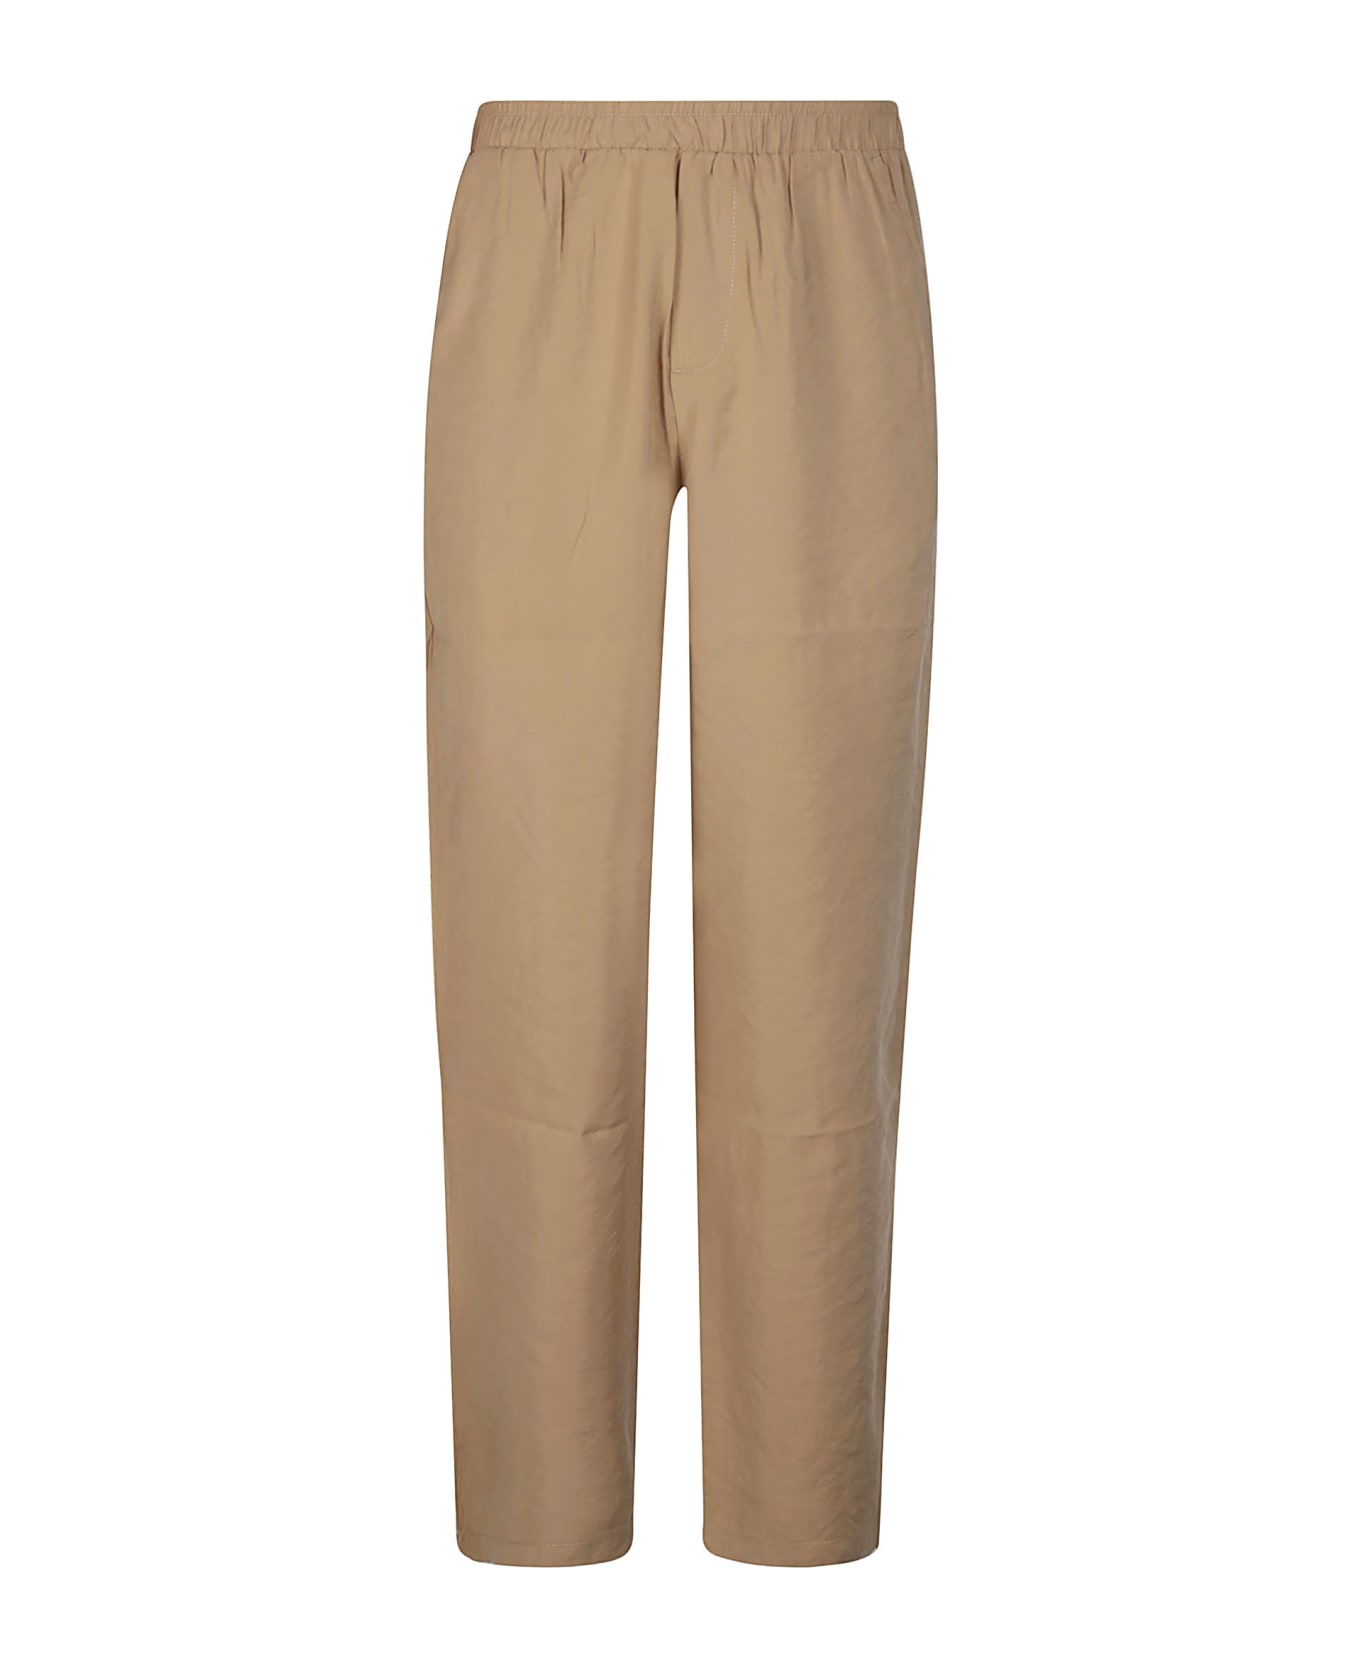 Family First Milano Soft Cupro Pant - NEUTRALS